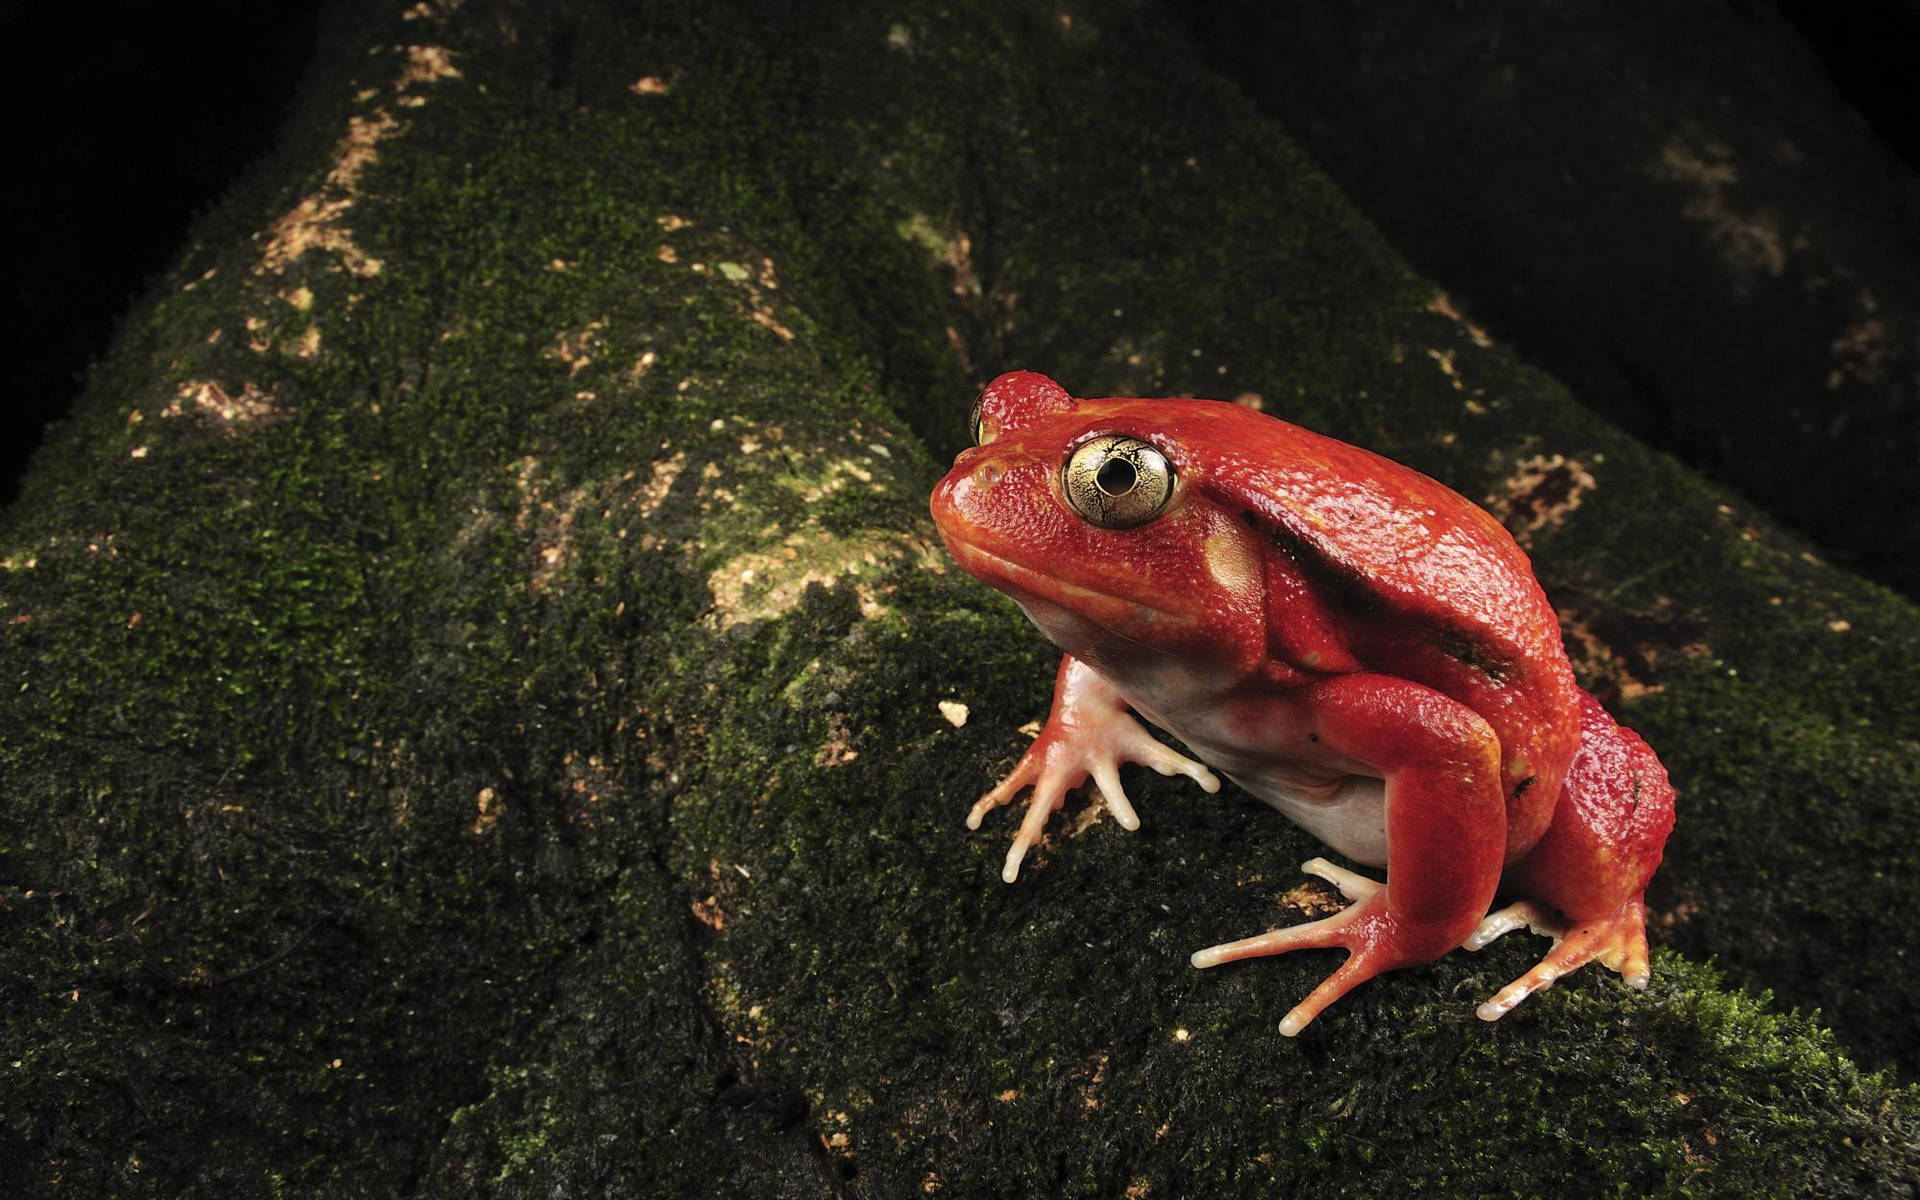 Cute Frog With Red Skin Background